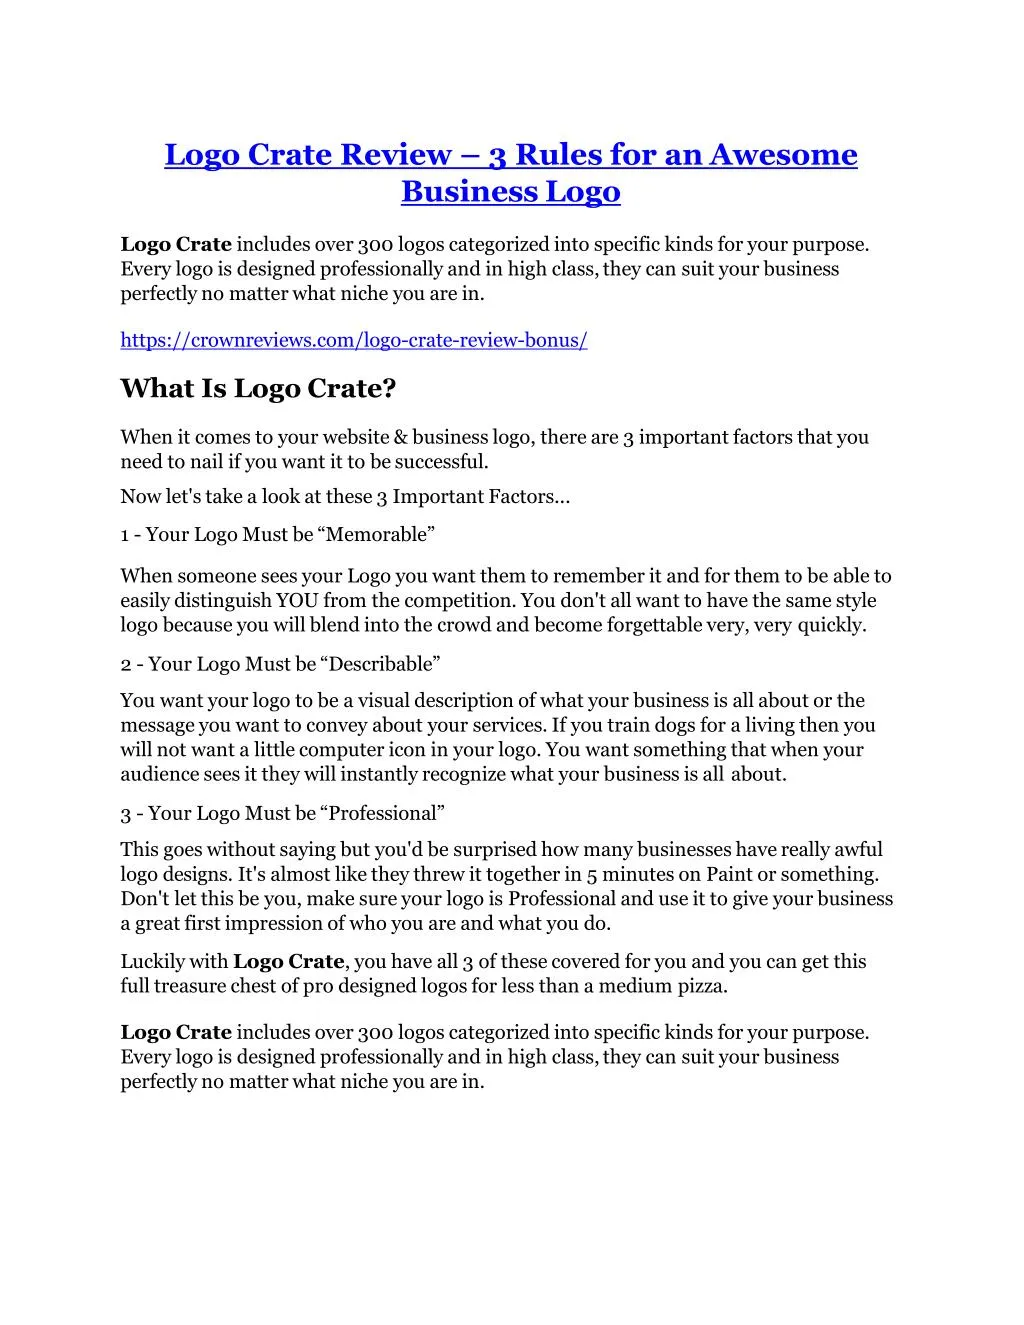 logo crate review 3 rules for an awesome business